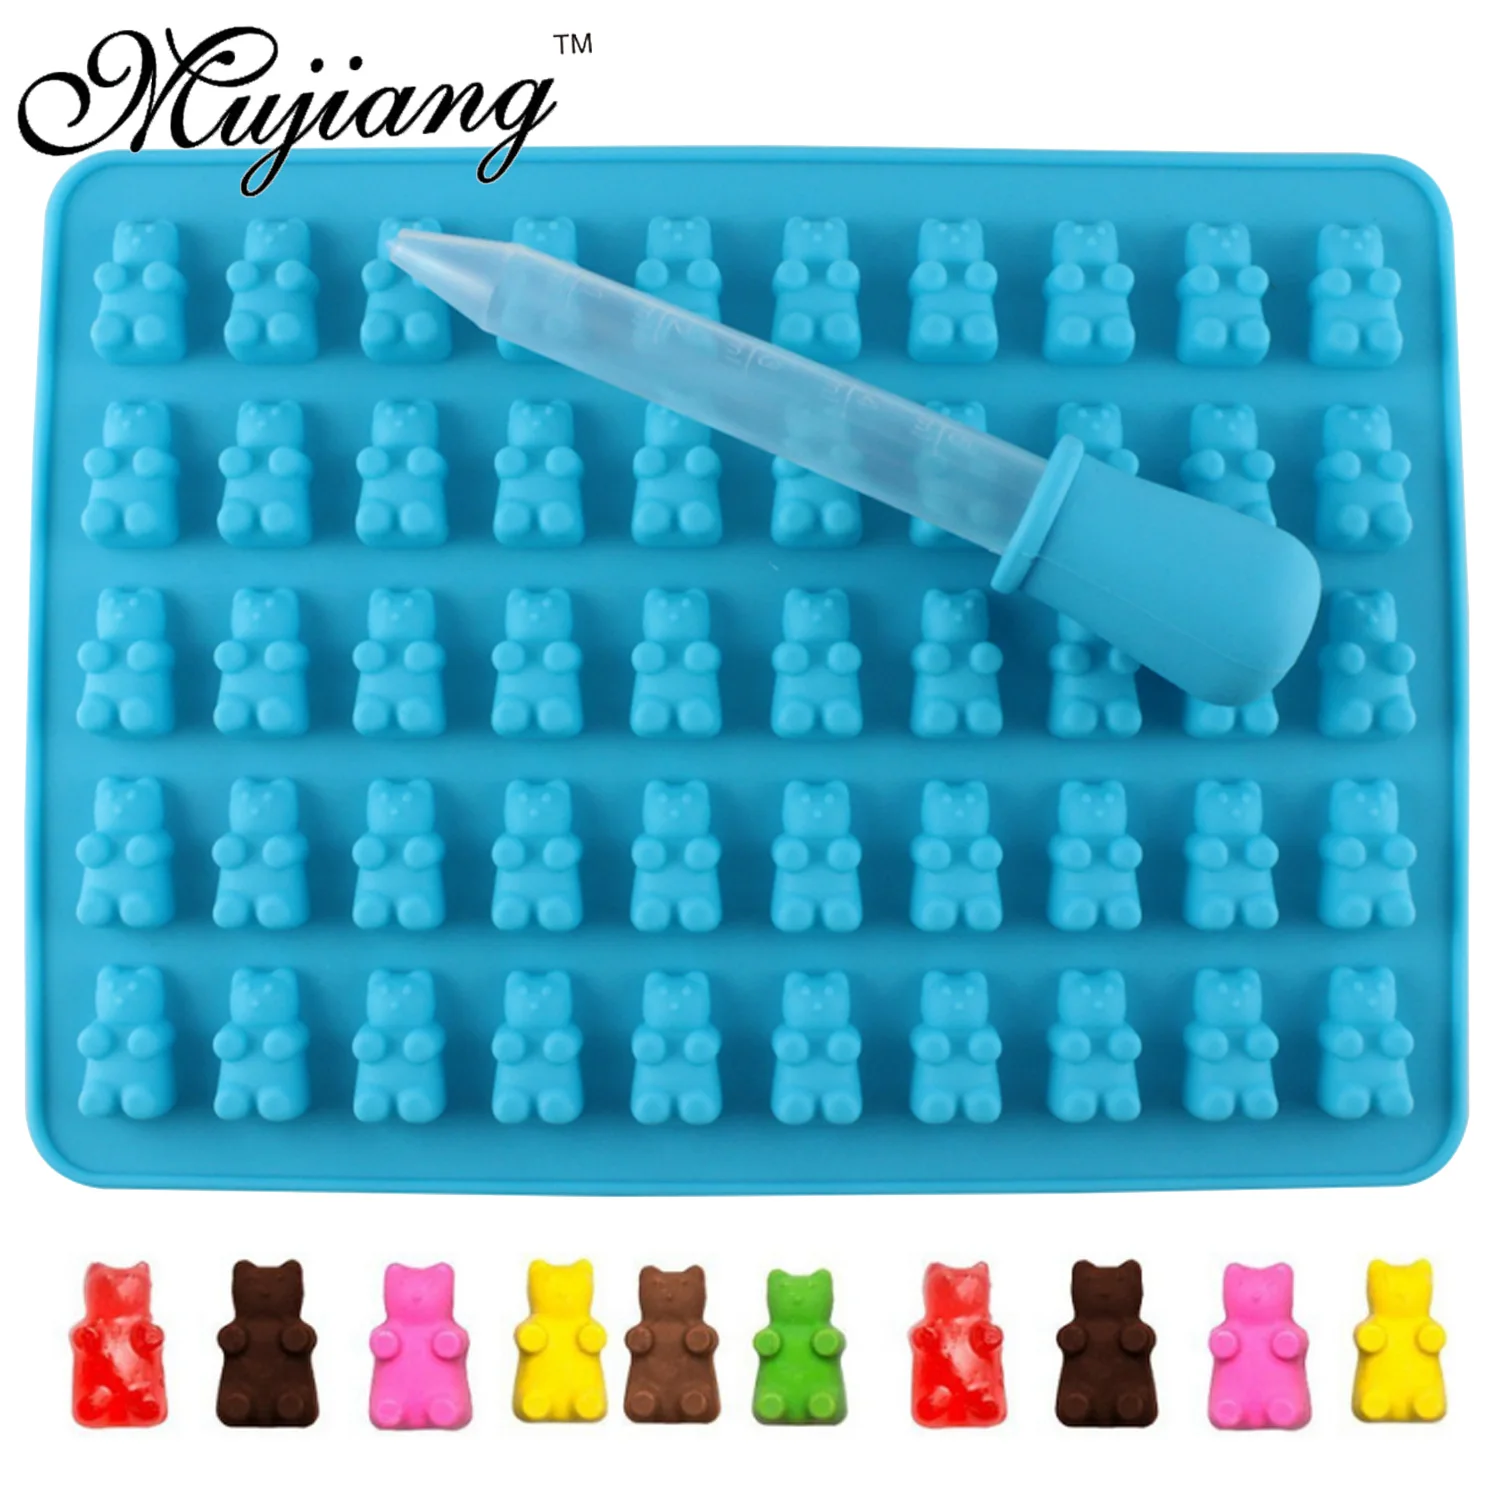 On the Weekend 50-Cavity Silicone Gummy Bear and Chocolate Mold